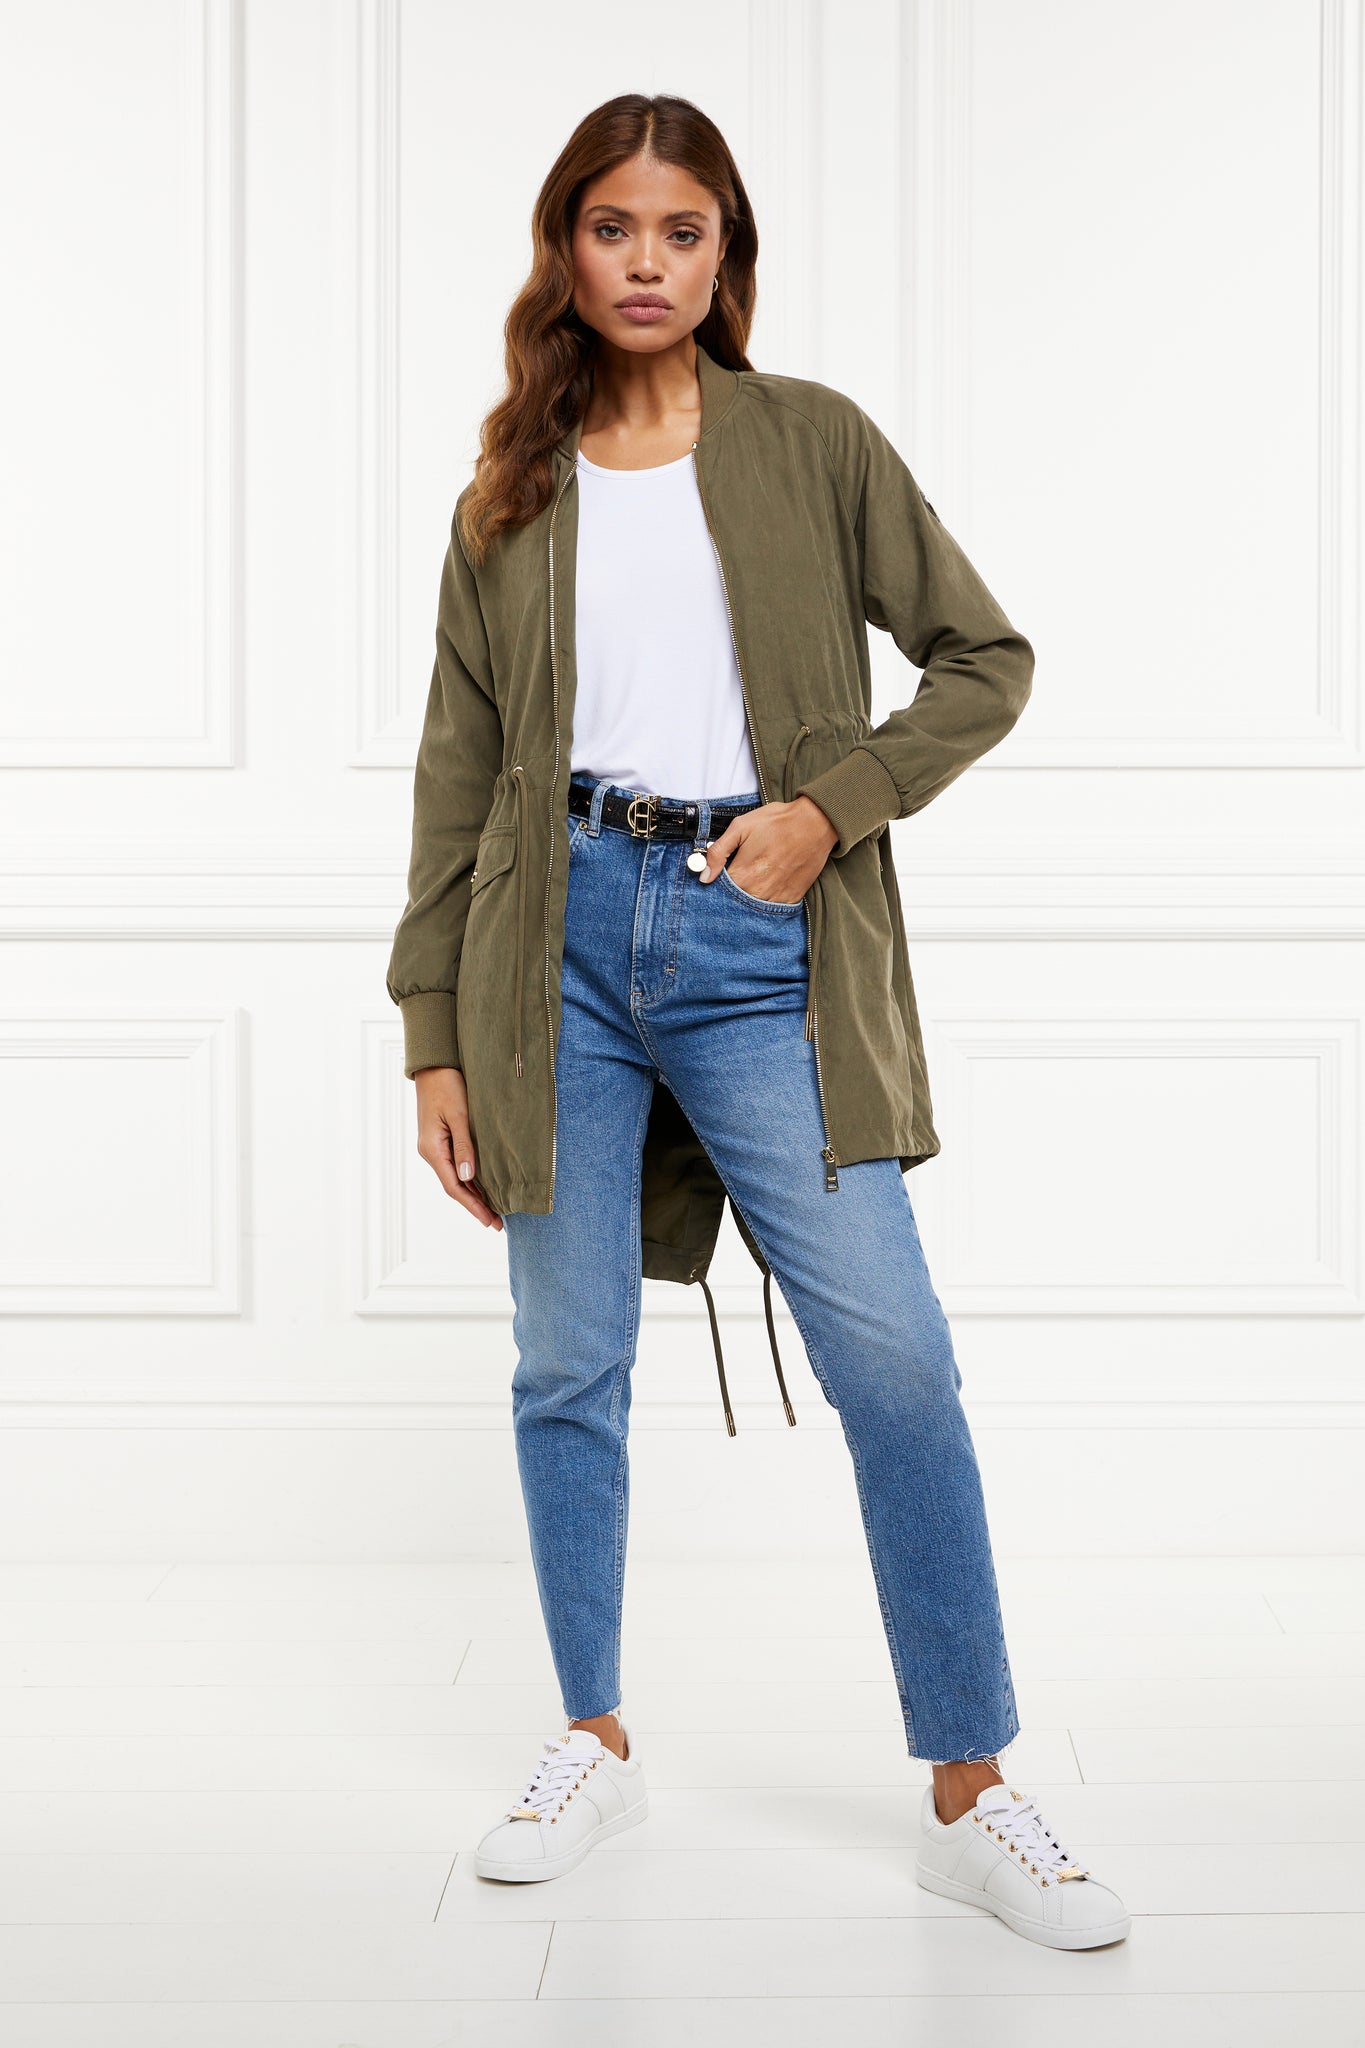  brushed suede longline lightweight parka jacket in khaki with an adjustable drawstring waist and fishtail hem and ribbed baseball style jersey collar and cuffs finished with gold hardware and gold shield on sleeve